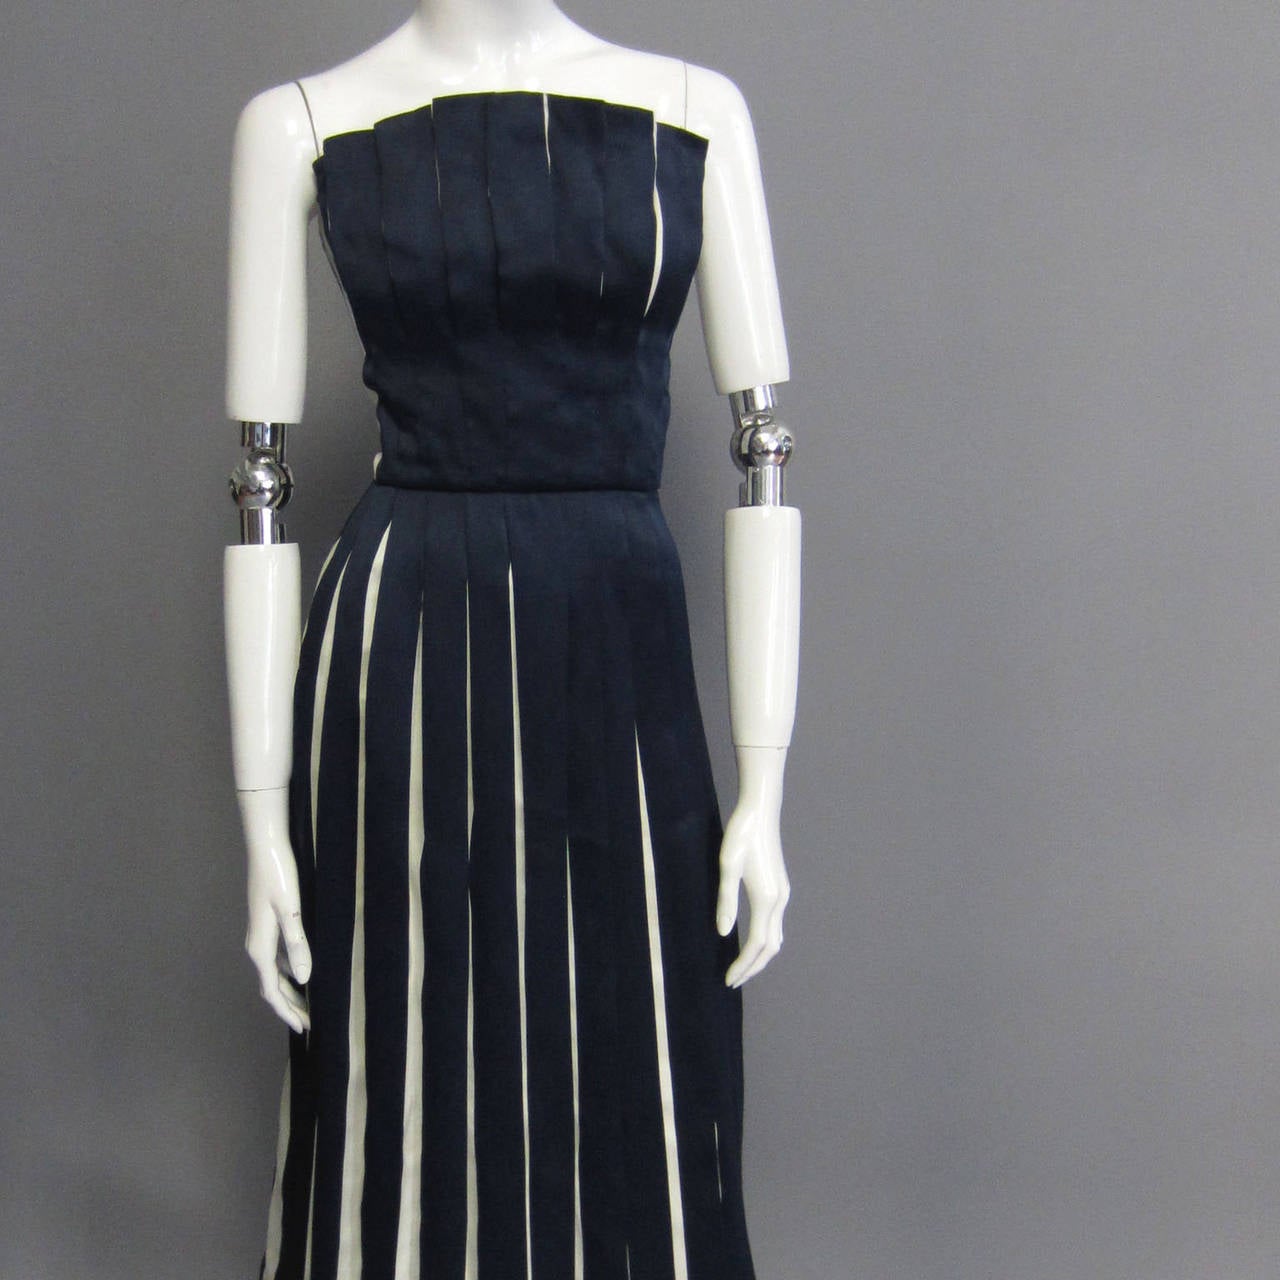 This Victor Costa silk taffeta creation features navy and white pleats throughout the entire dress. The skirt is fully pleated with the contrasting colors. The pleats are layered on the bodice to create a fan like effect across the top. The back